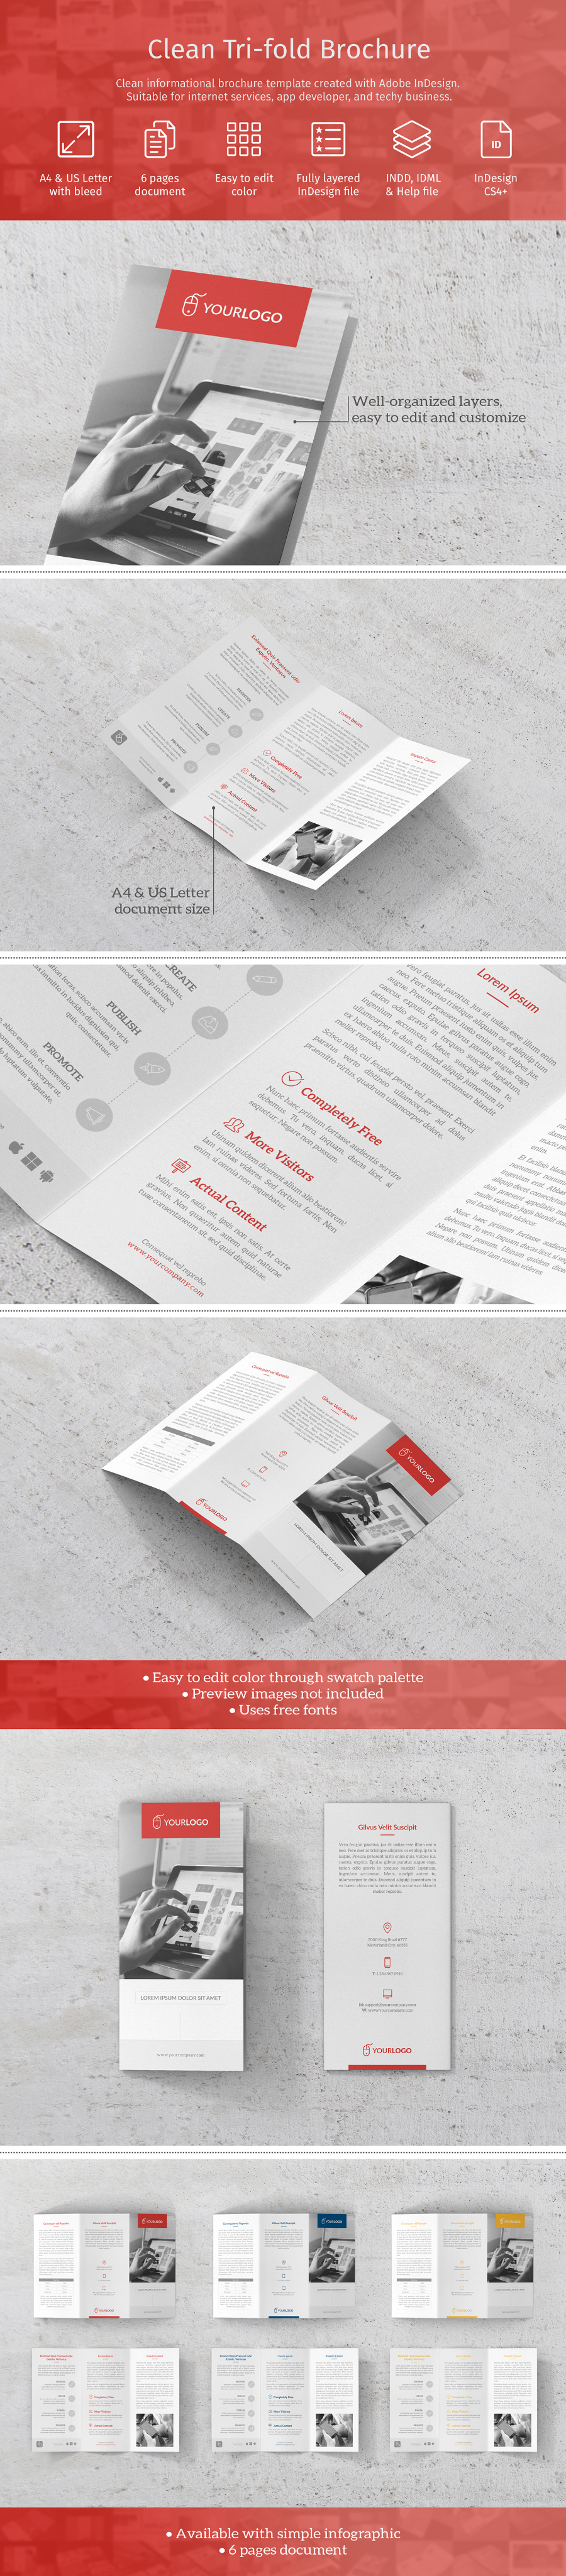 Tri Fold Brochure Template Indesign Free from freedesignresources.net